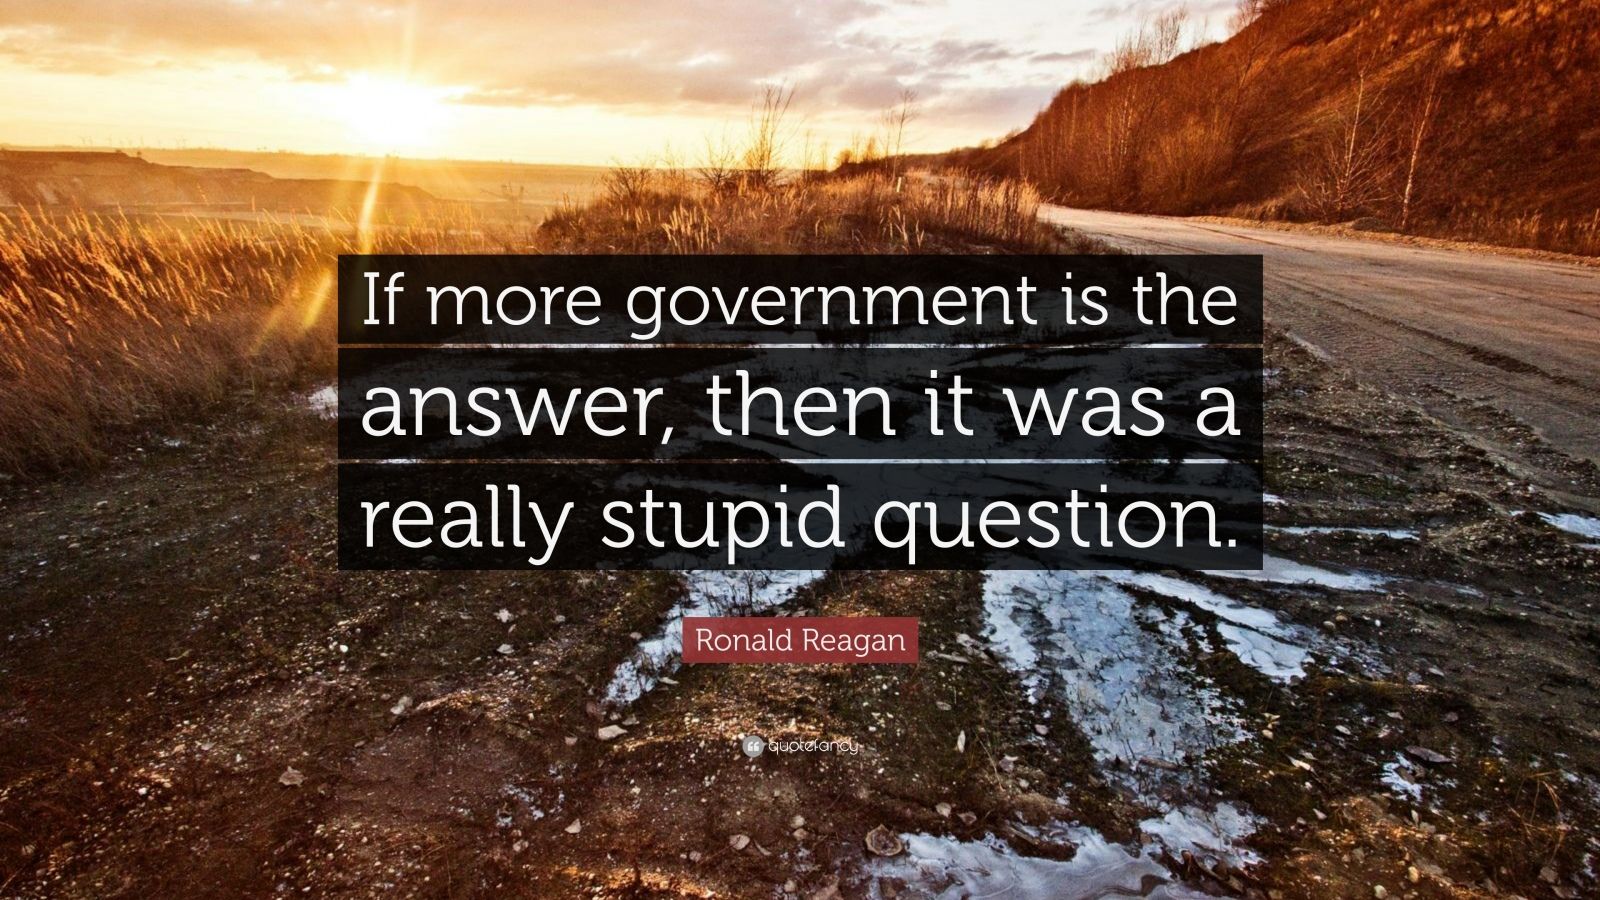 Ronald Reagan Quote: "If more government is the answer, then it was a really stupid question ...